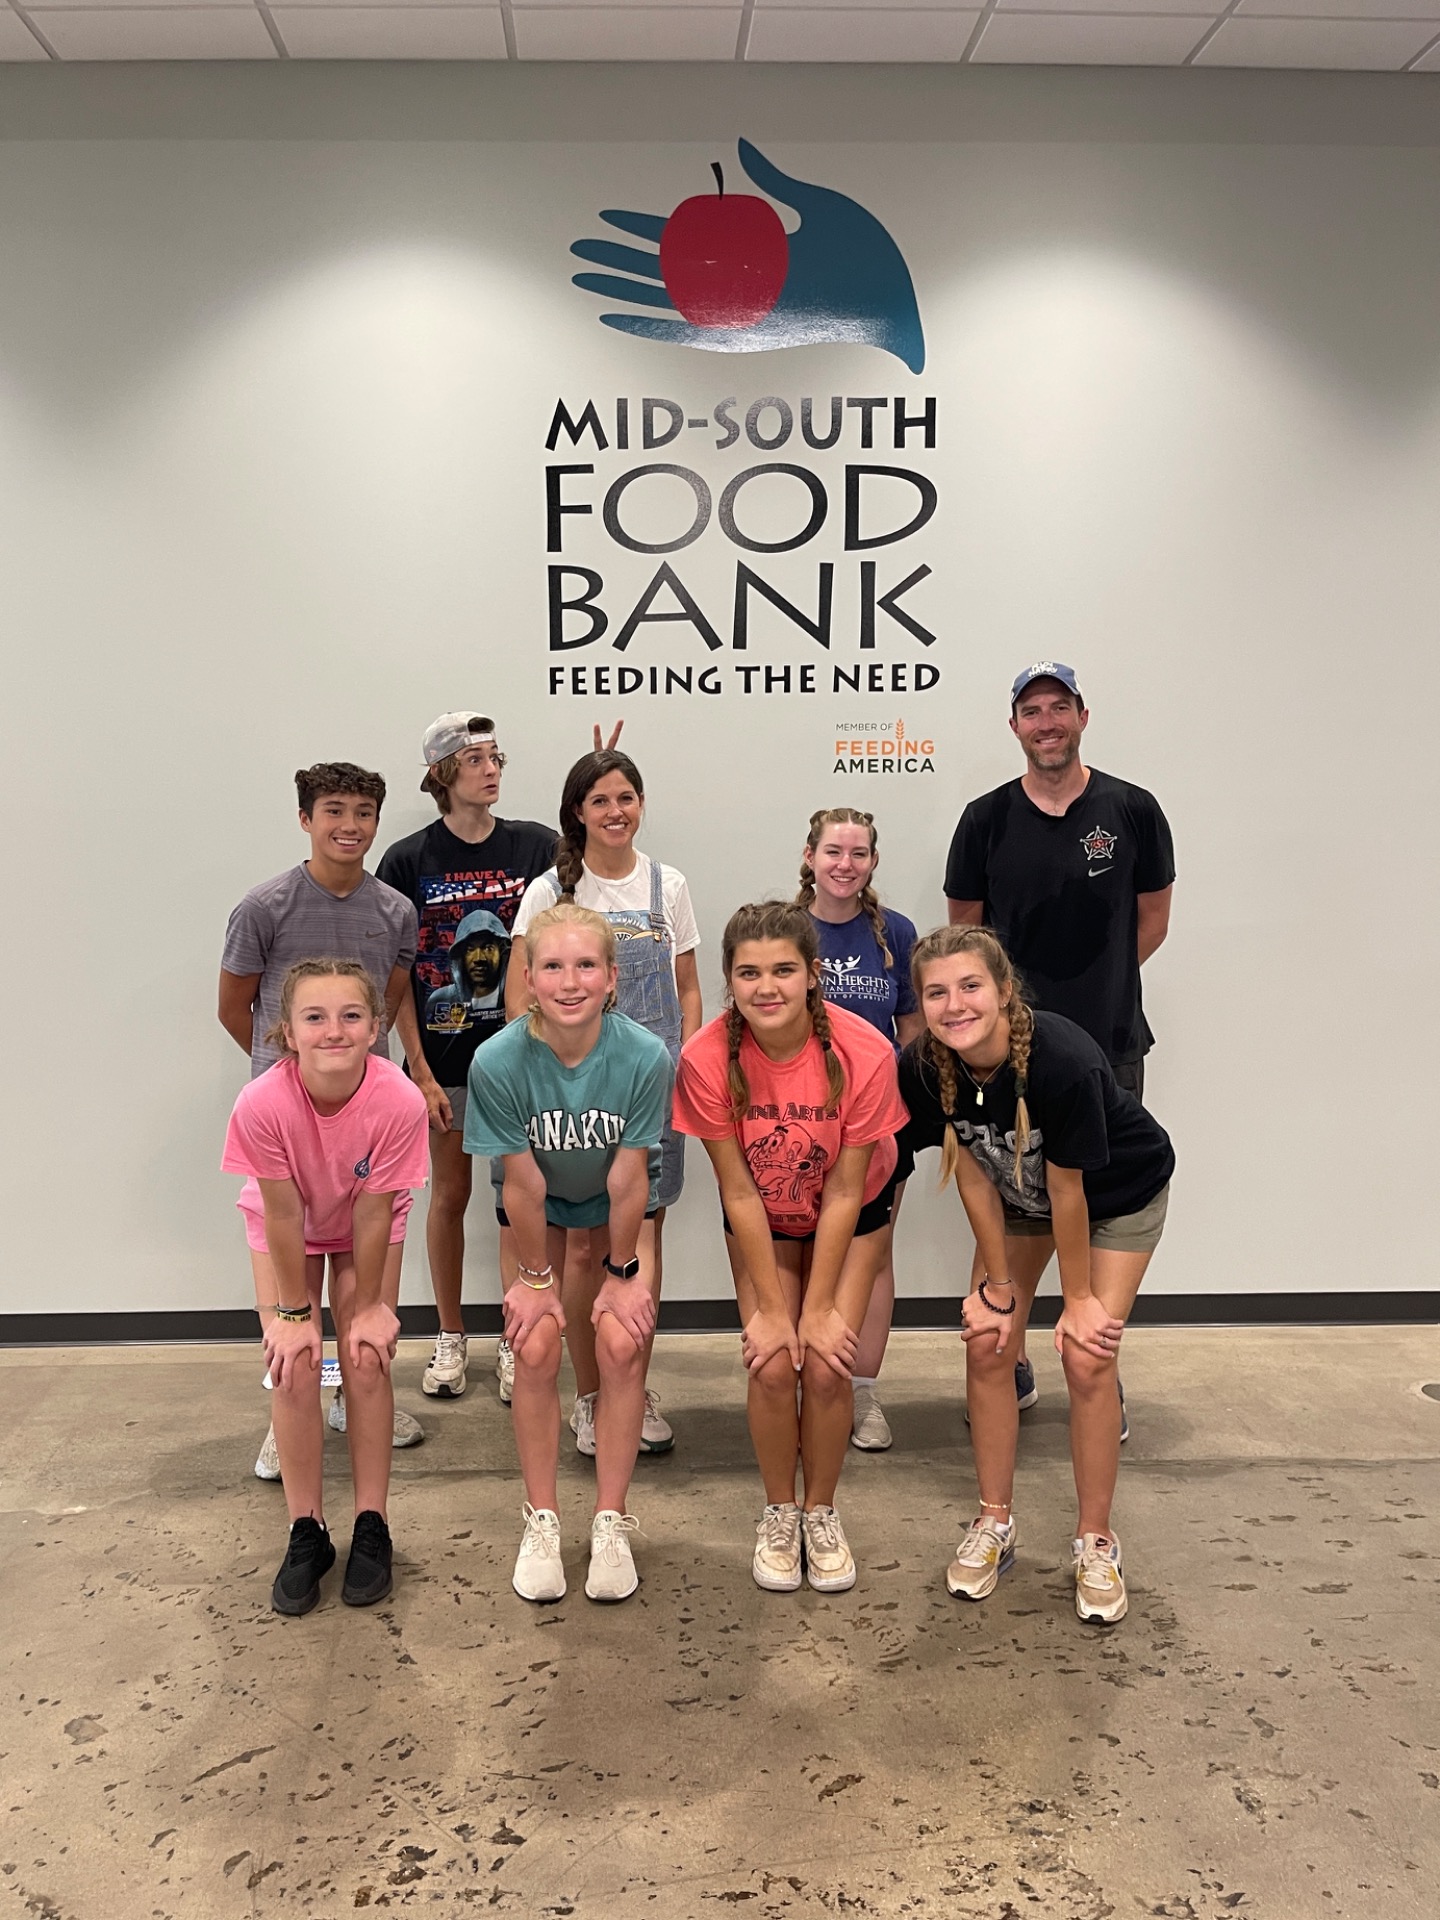 Mid-South Food Bank is Awesome